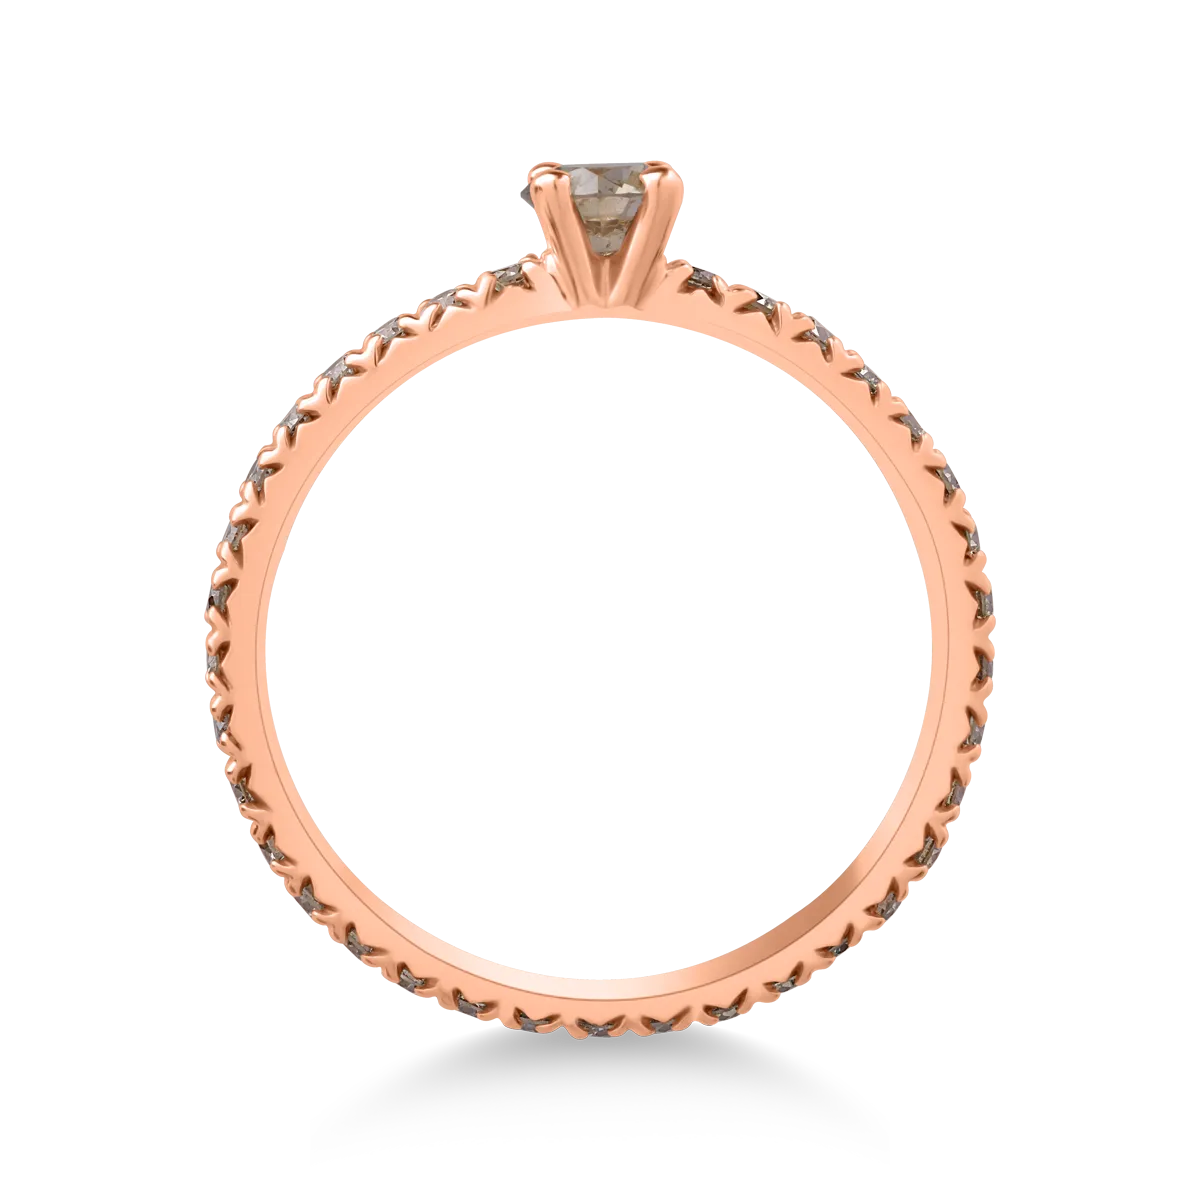 18K rose gold ring with 0.57ct brown diamonds